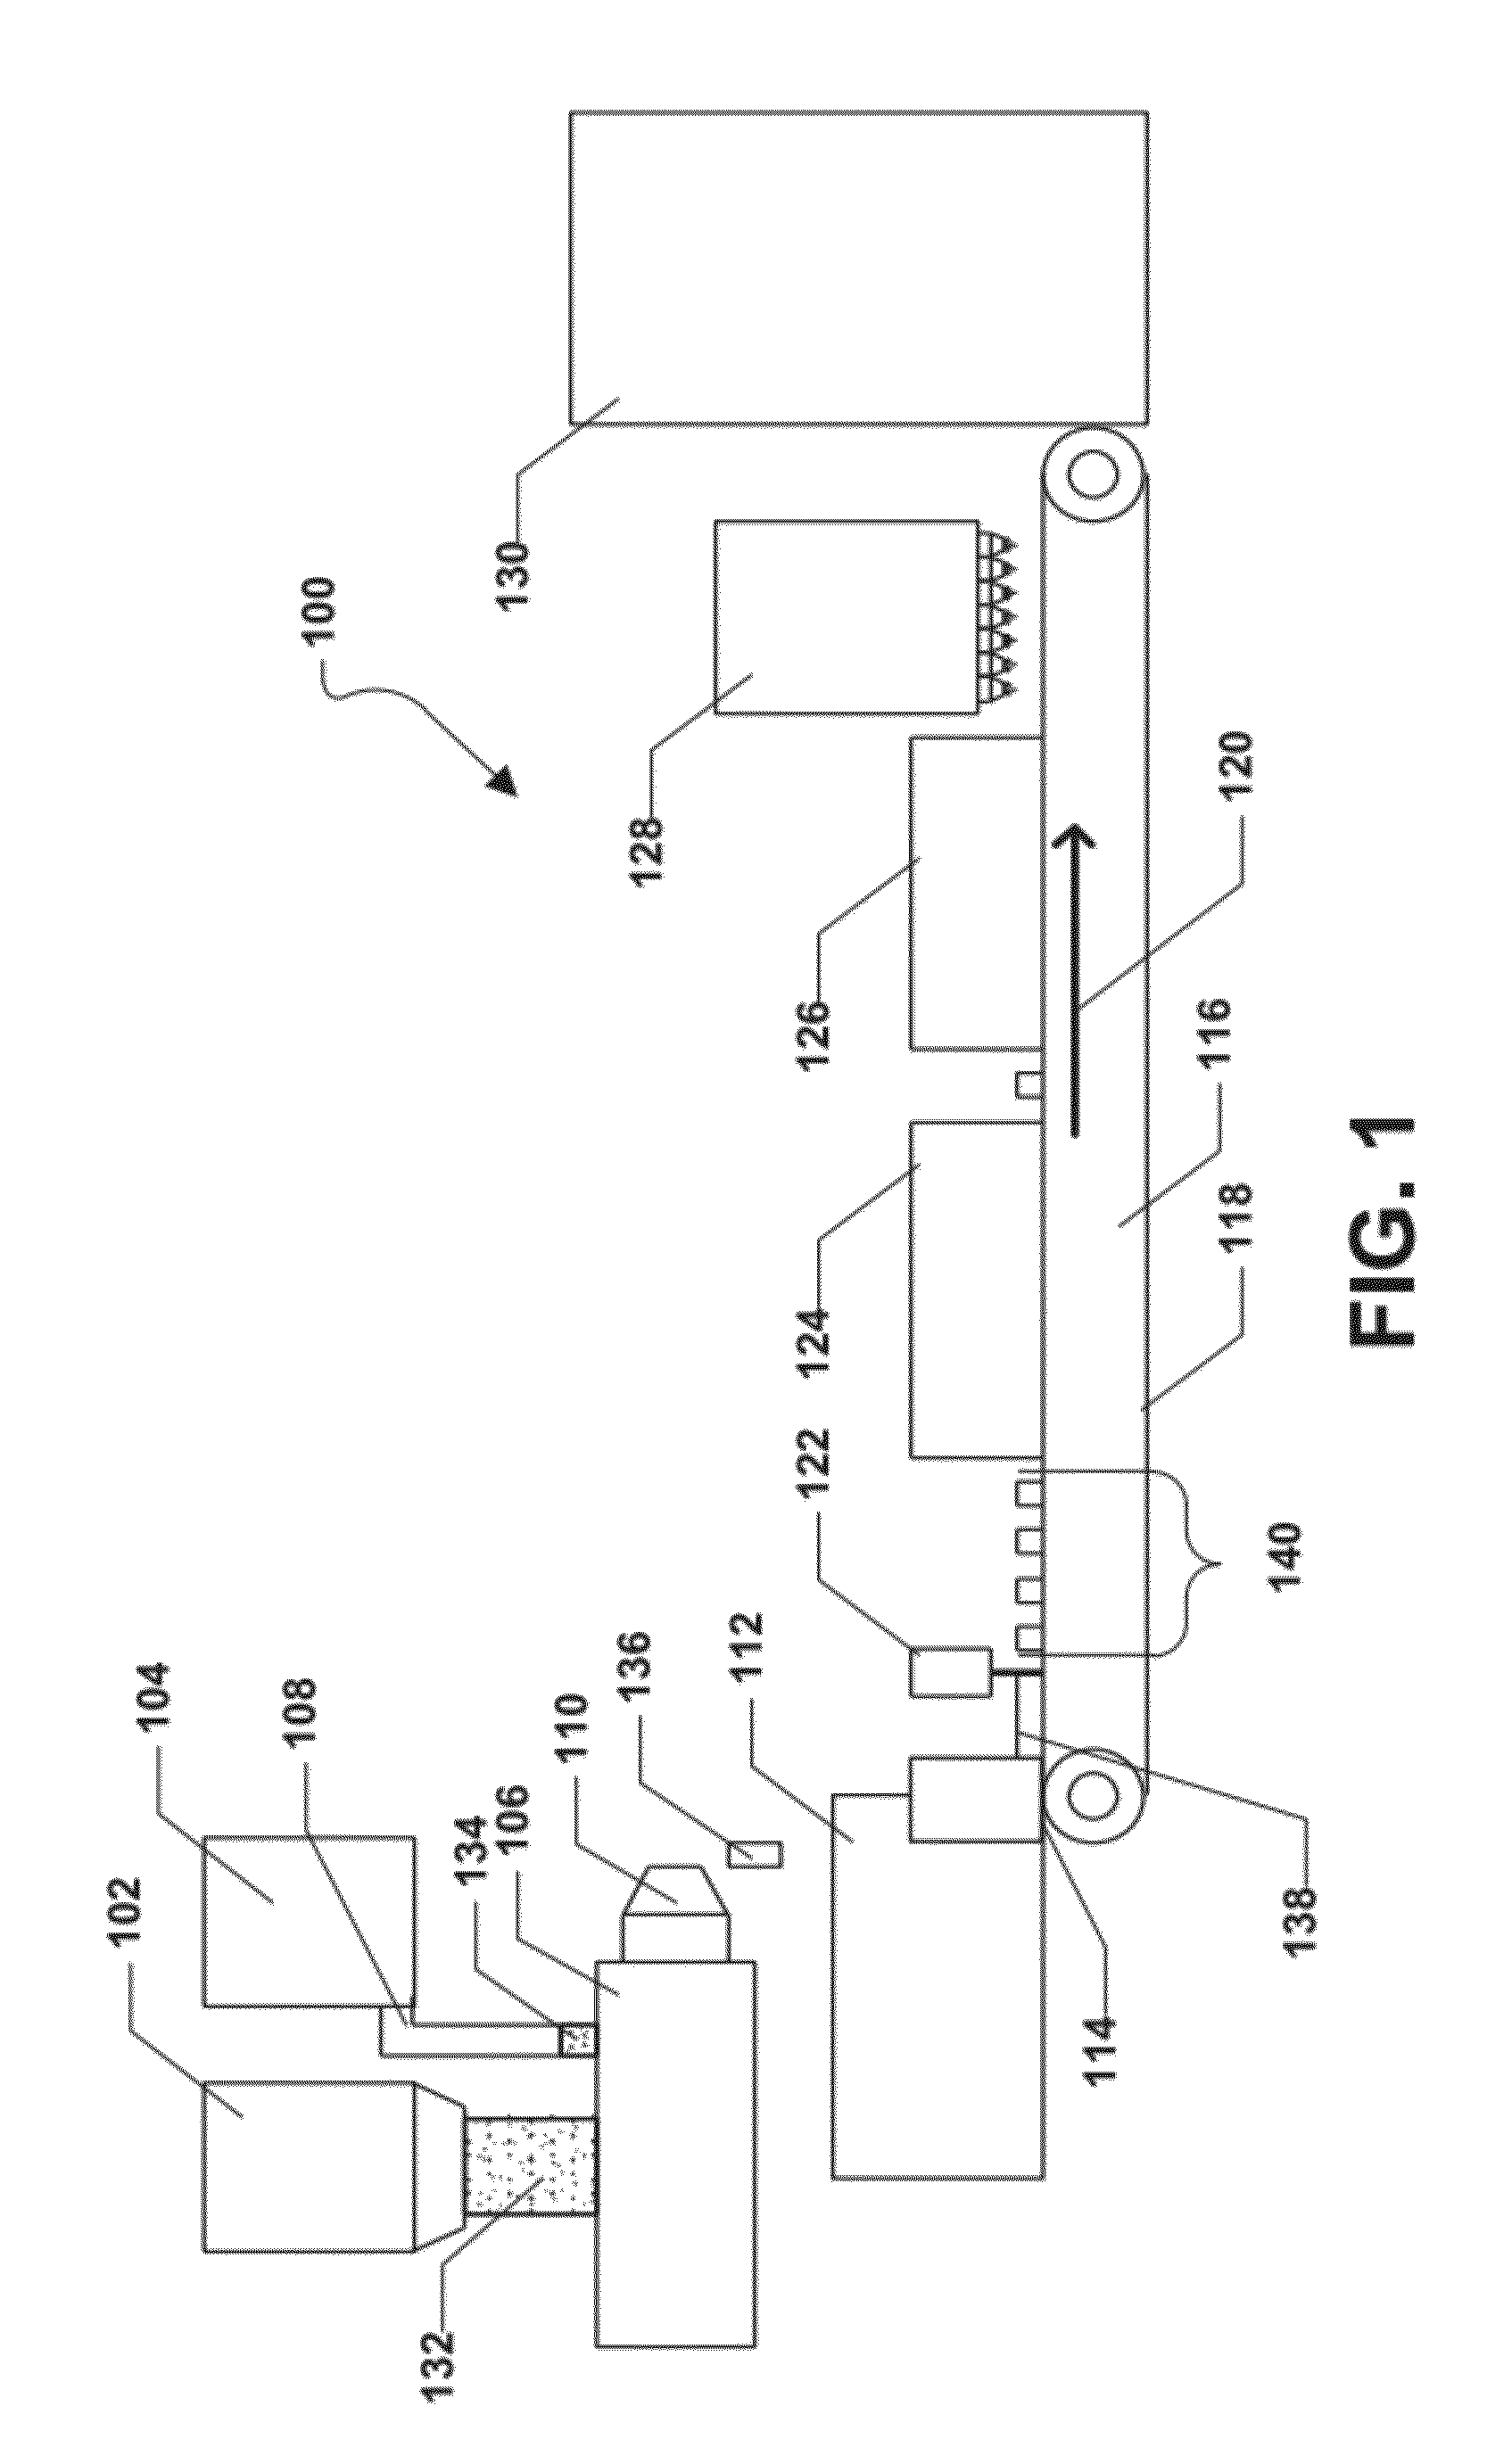 Method of forming a shaped abrasive particle